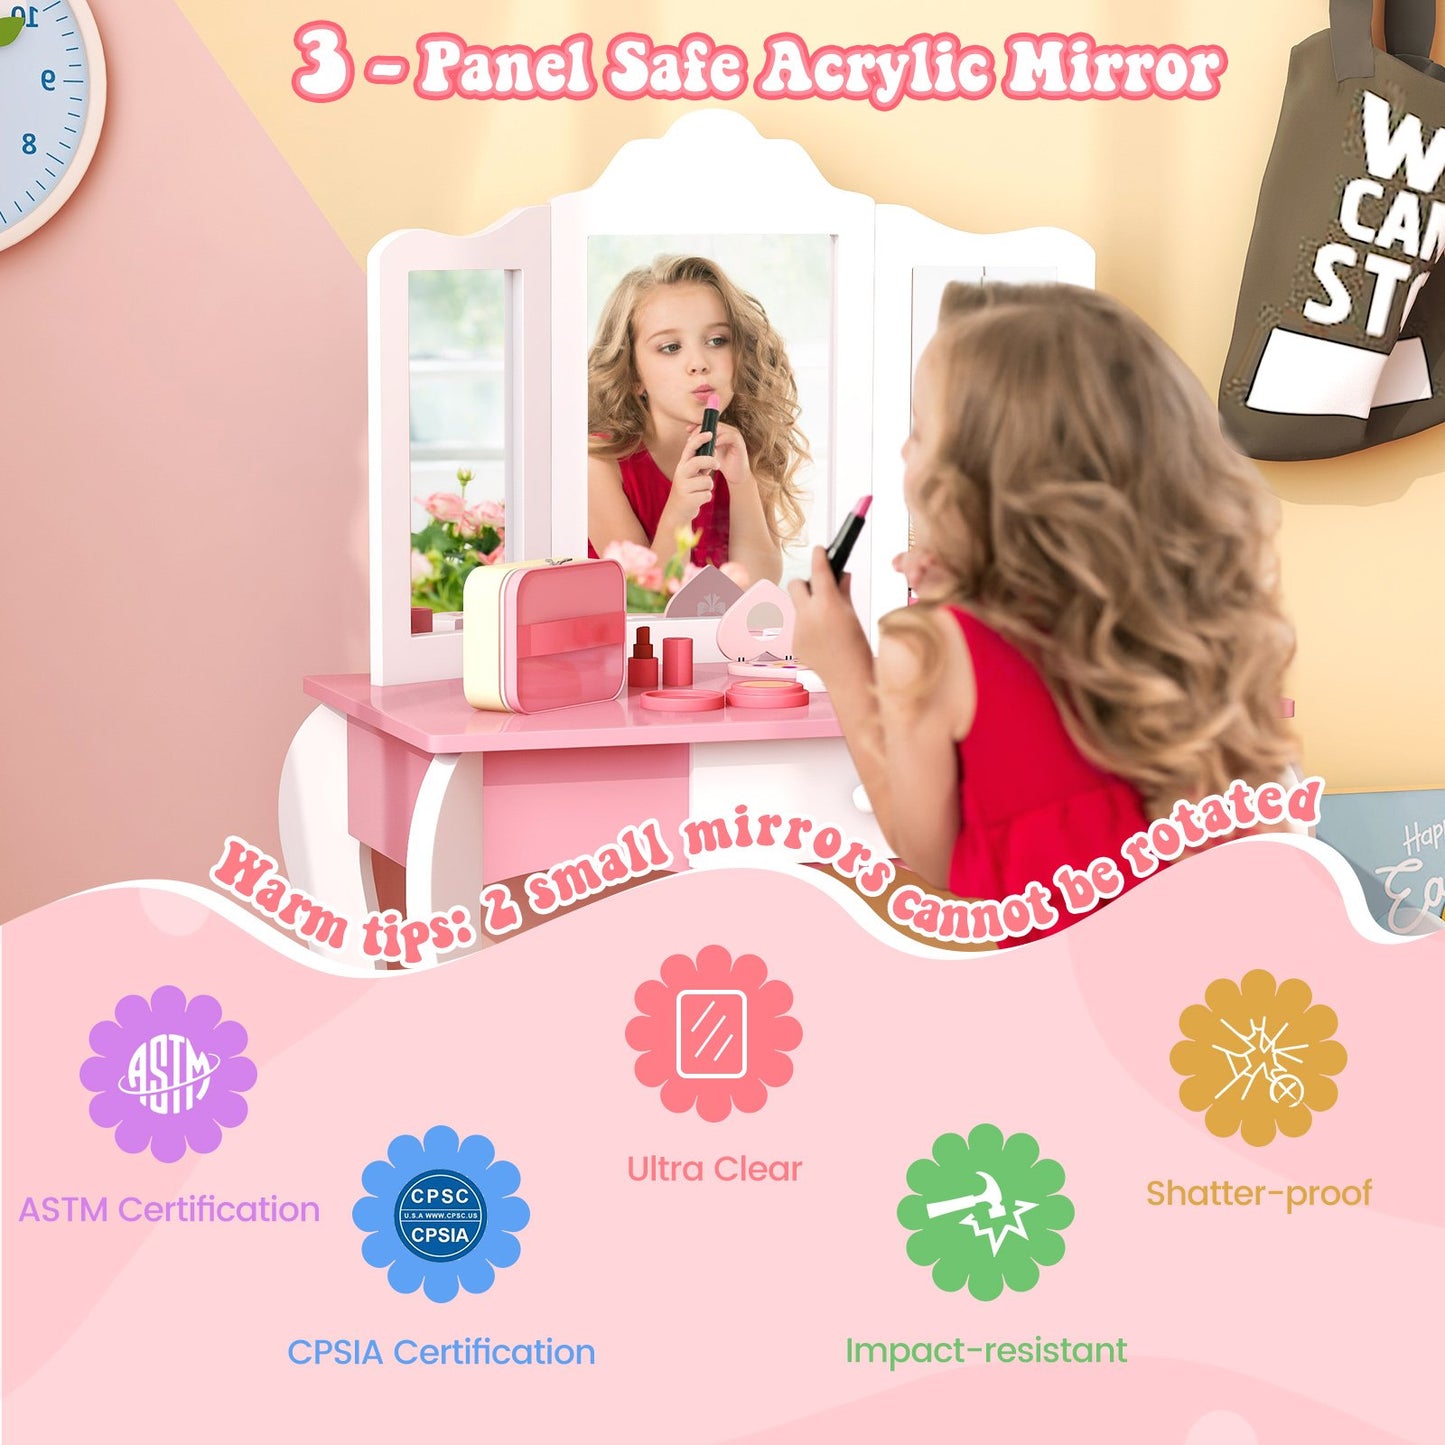 Kid's Wooden Vanity Table and Stool Set  with 3-Panel Acrylic Mirror, White